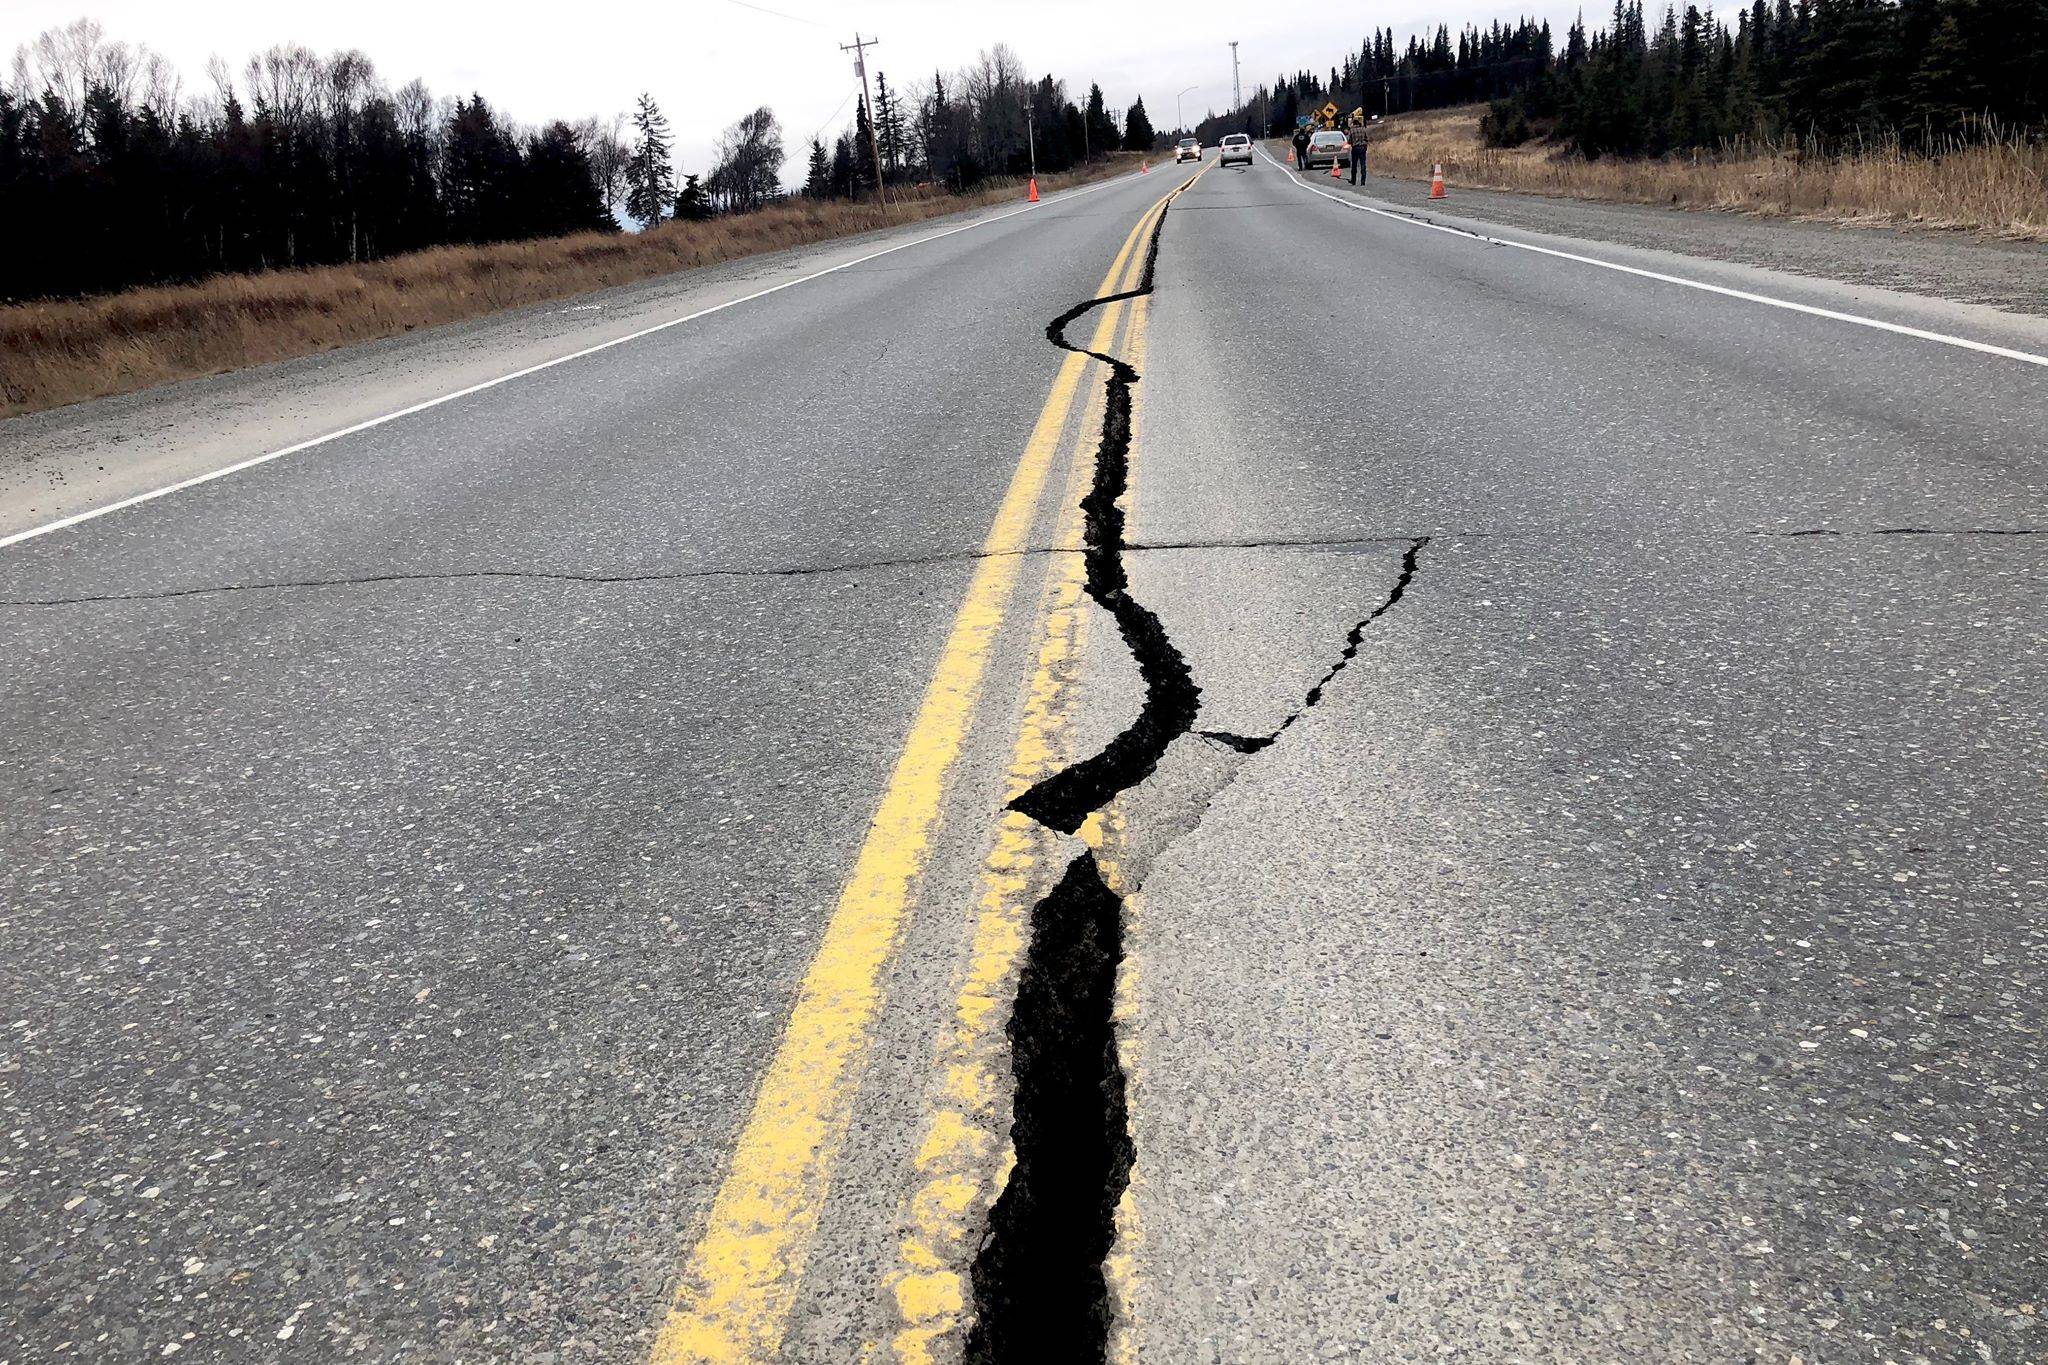 A crack runs through the center lane of the Kenai Spur Highway near Nikiski. The highway suffered minor damage after the Nov. 30, 2018, earthquake. (Photo by Victoria Petersen/Peninsula Clarion)